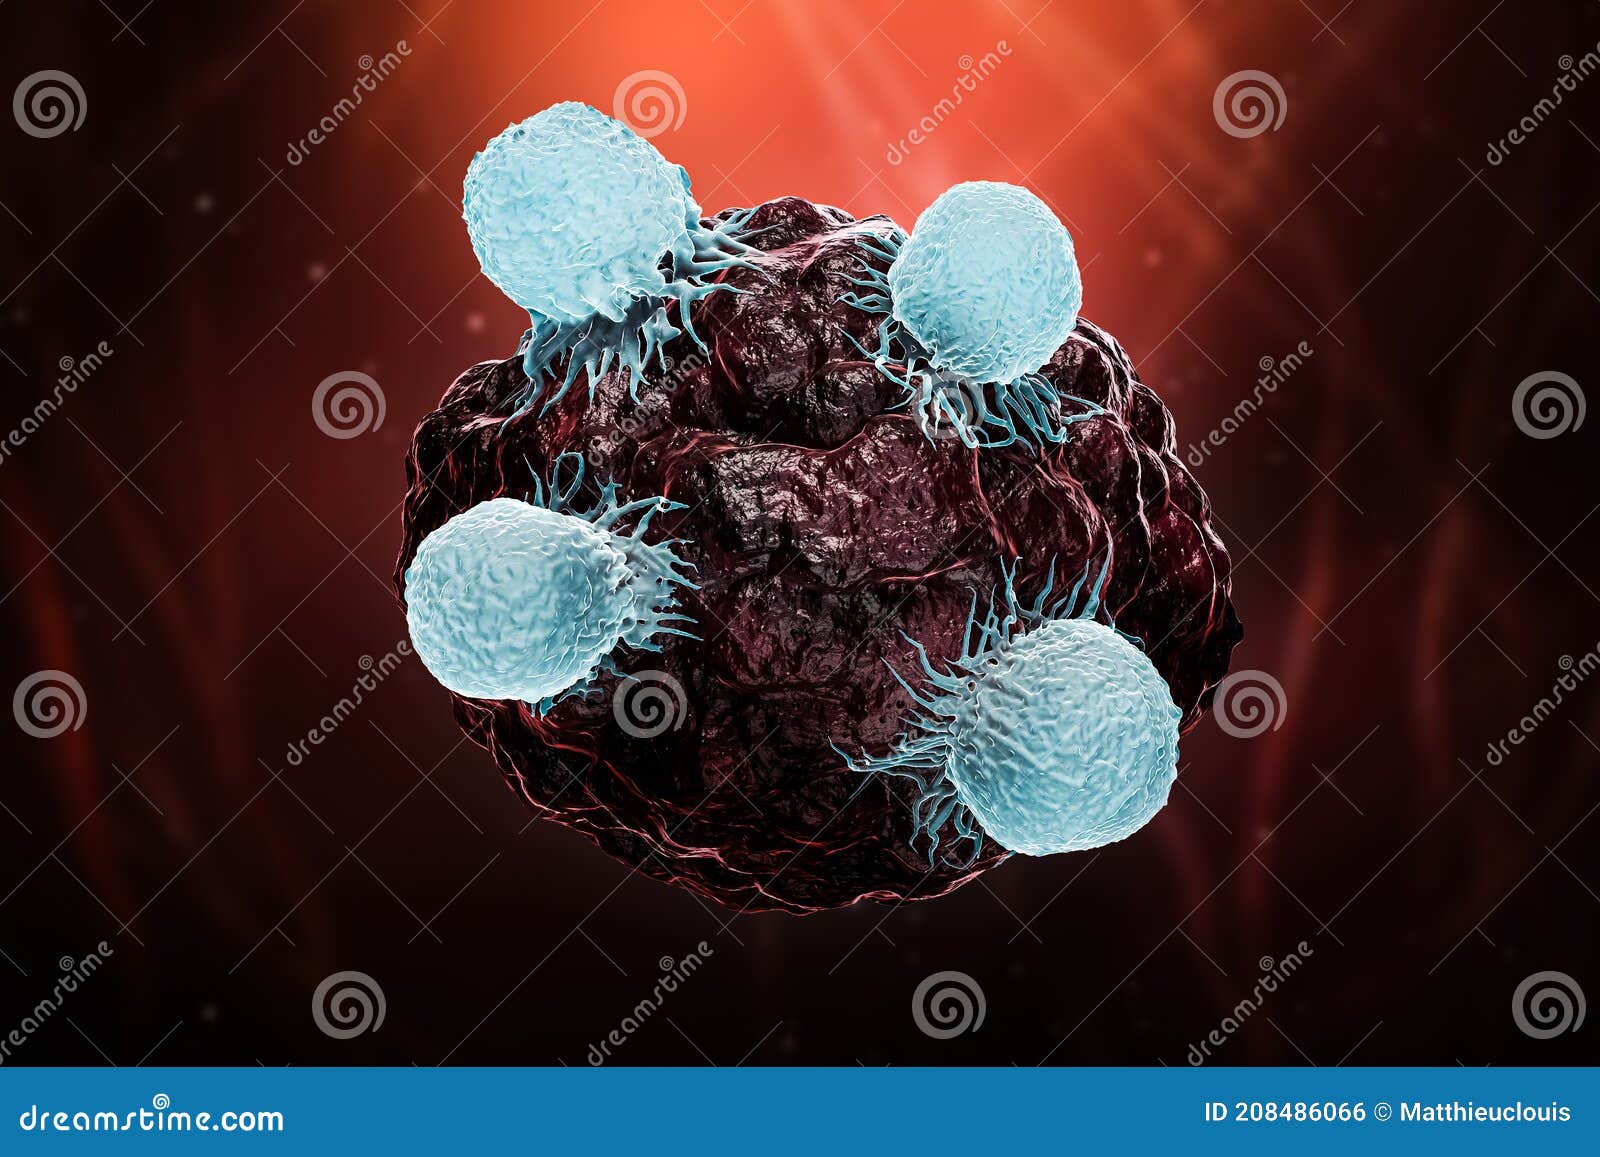 white blood cells or t lymphocytes or natural killer t attack a cancer or tumor or infected cell 3d rendering .